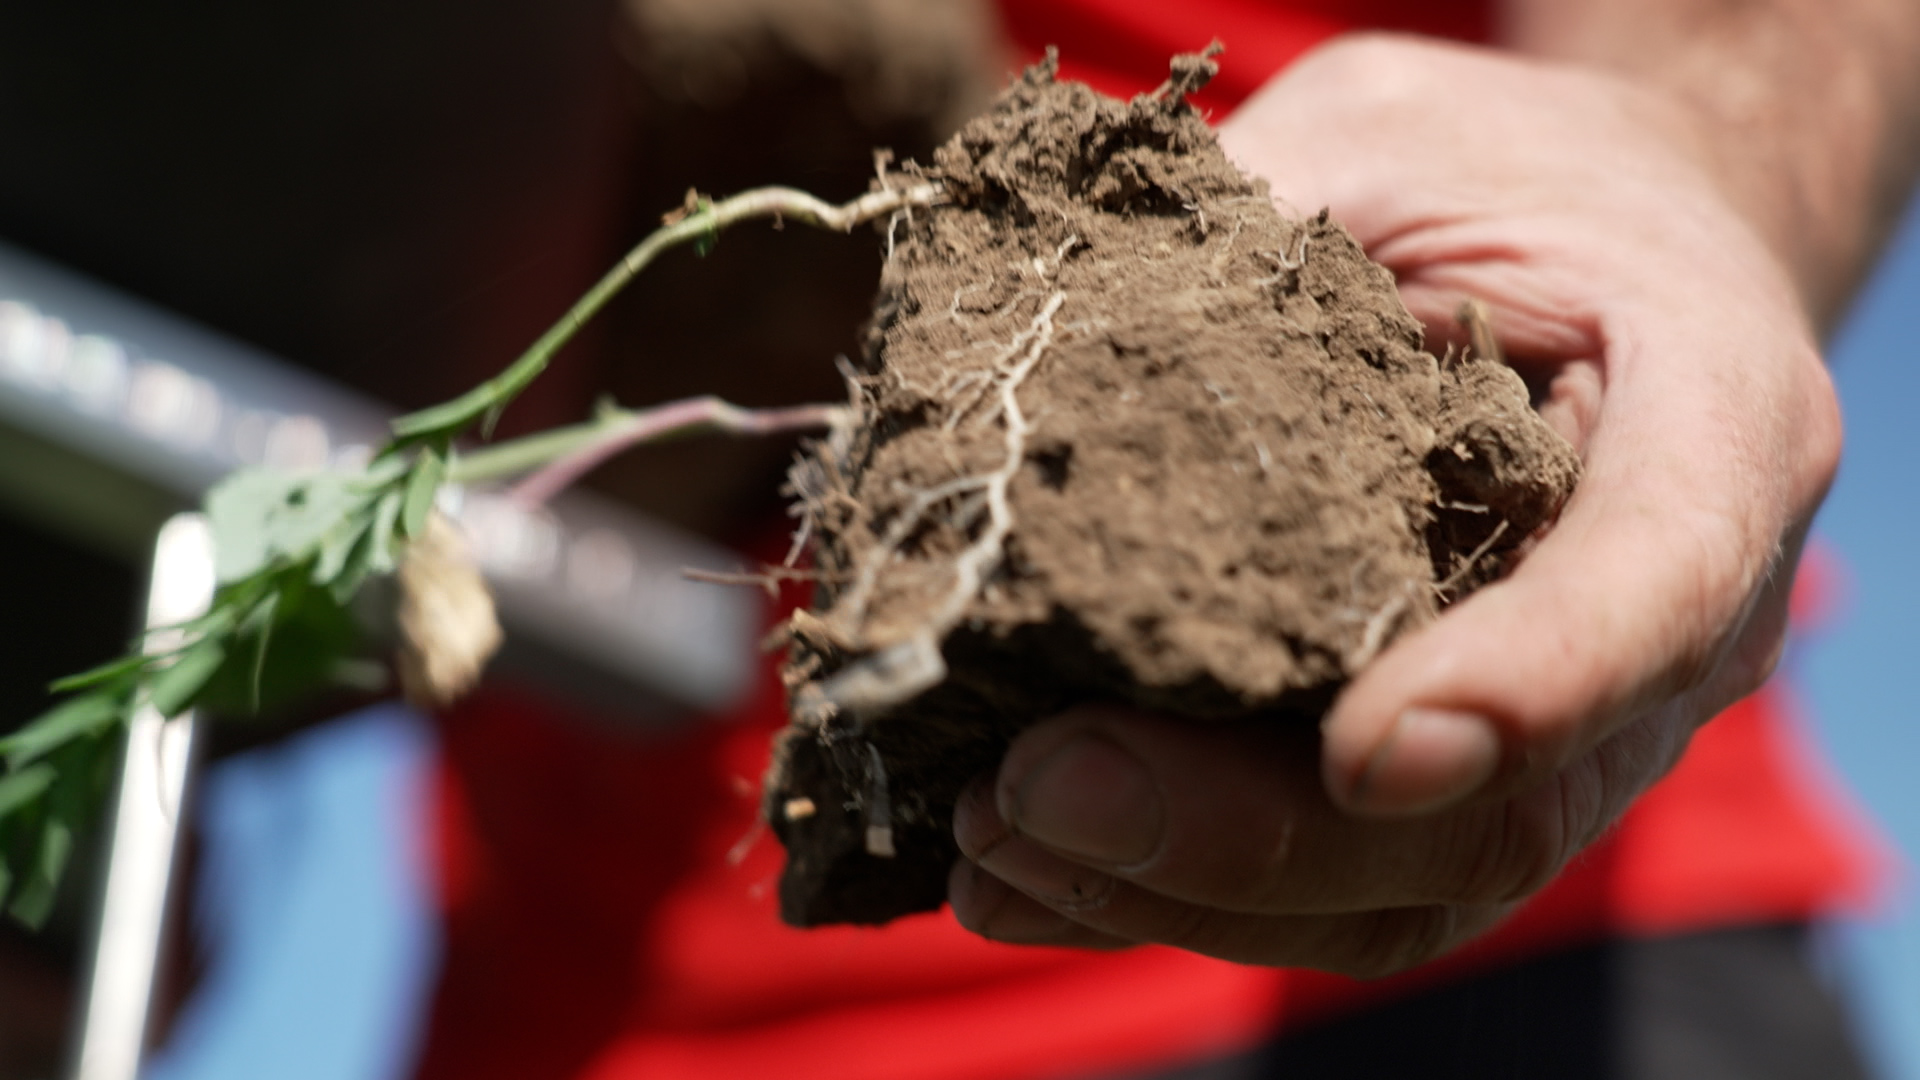 Plant roots indicate where in the soil the CO2 is stored./CGTN/Dworschak